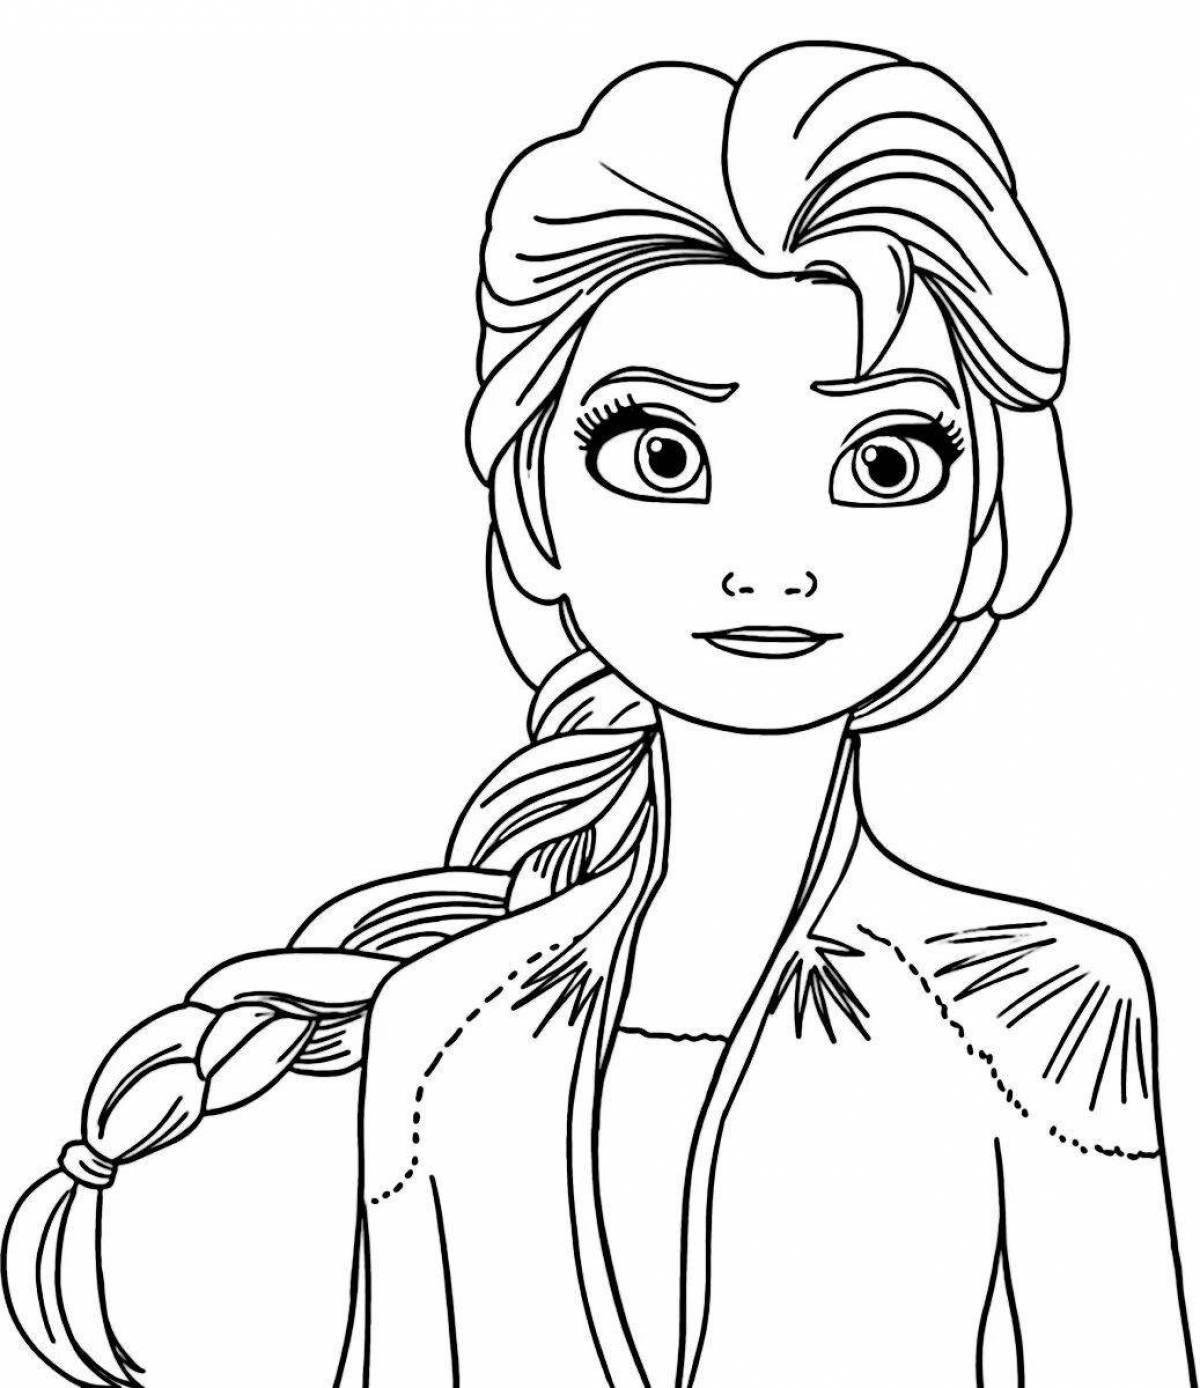 Delightful coloring elsa let go and forget